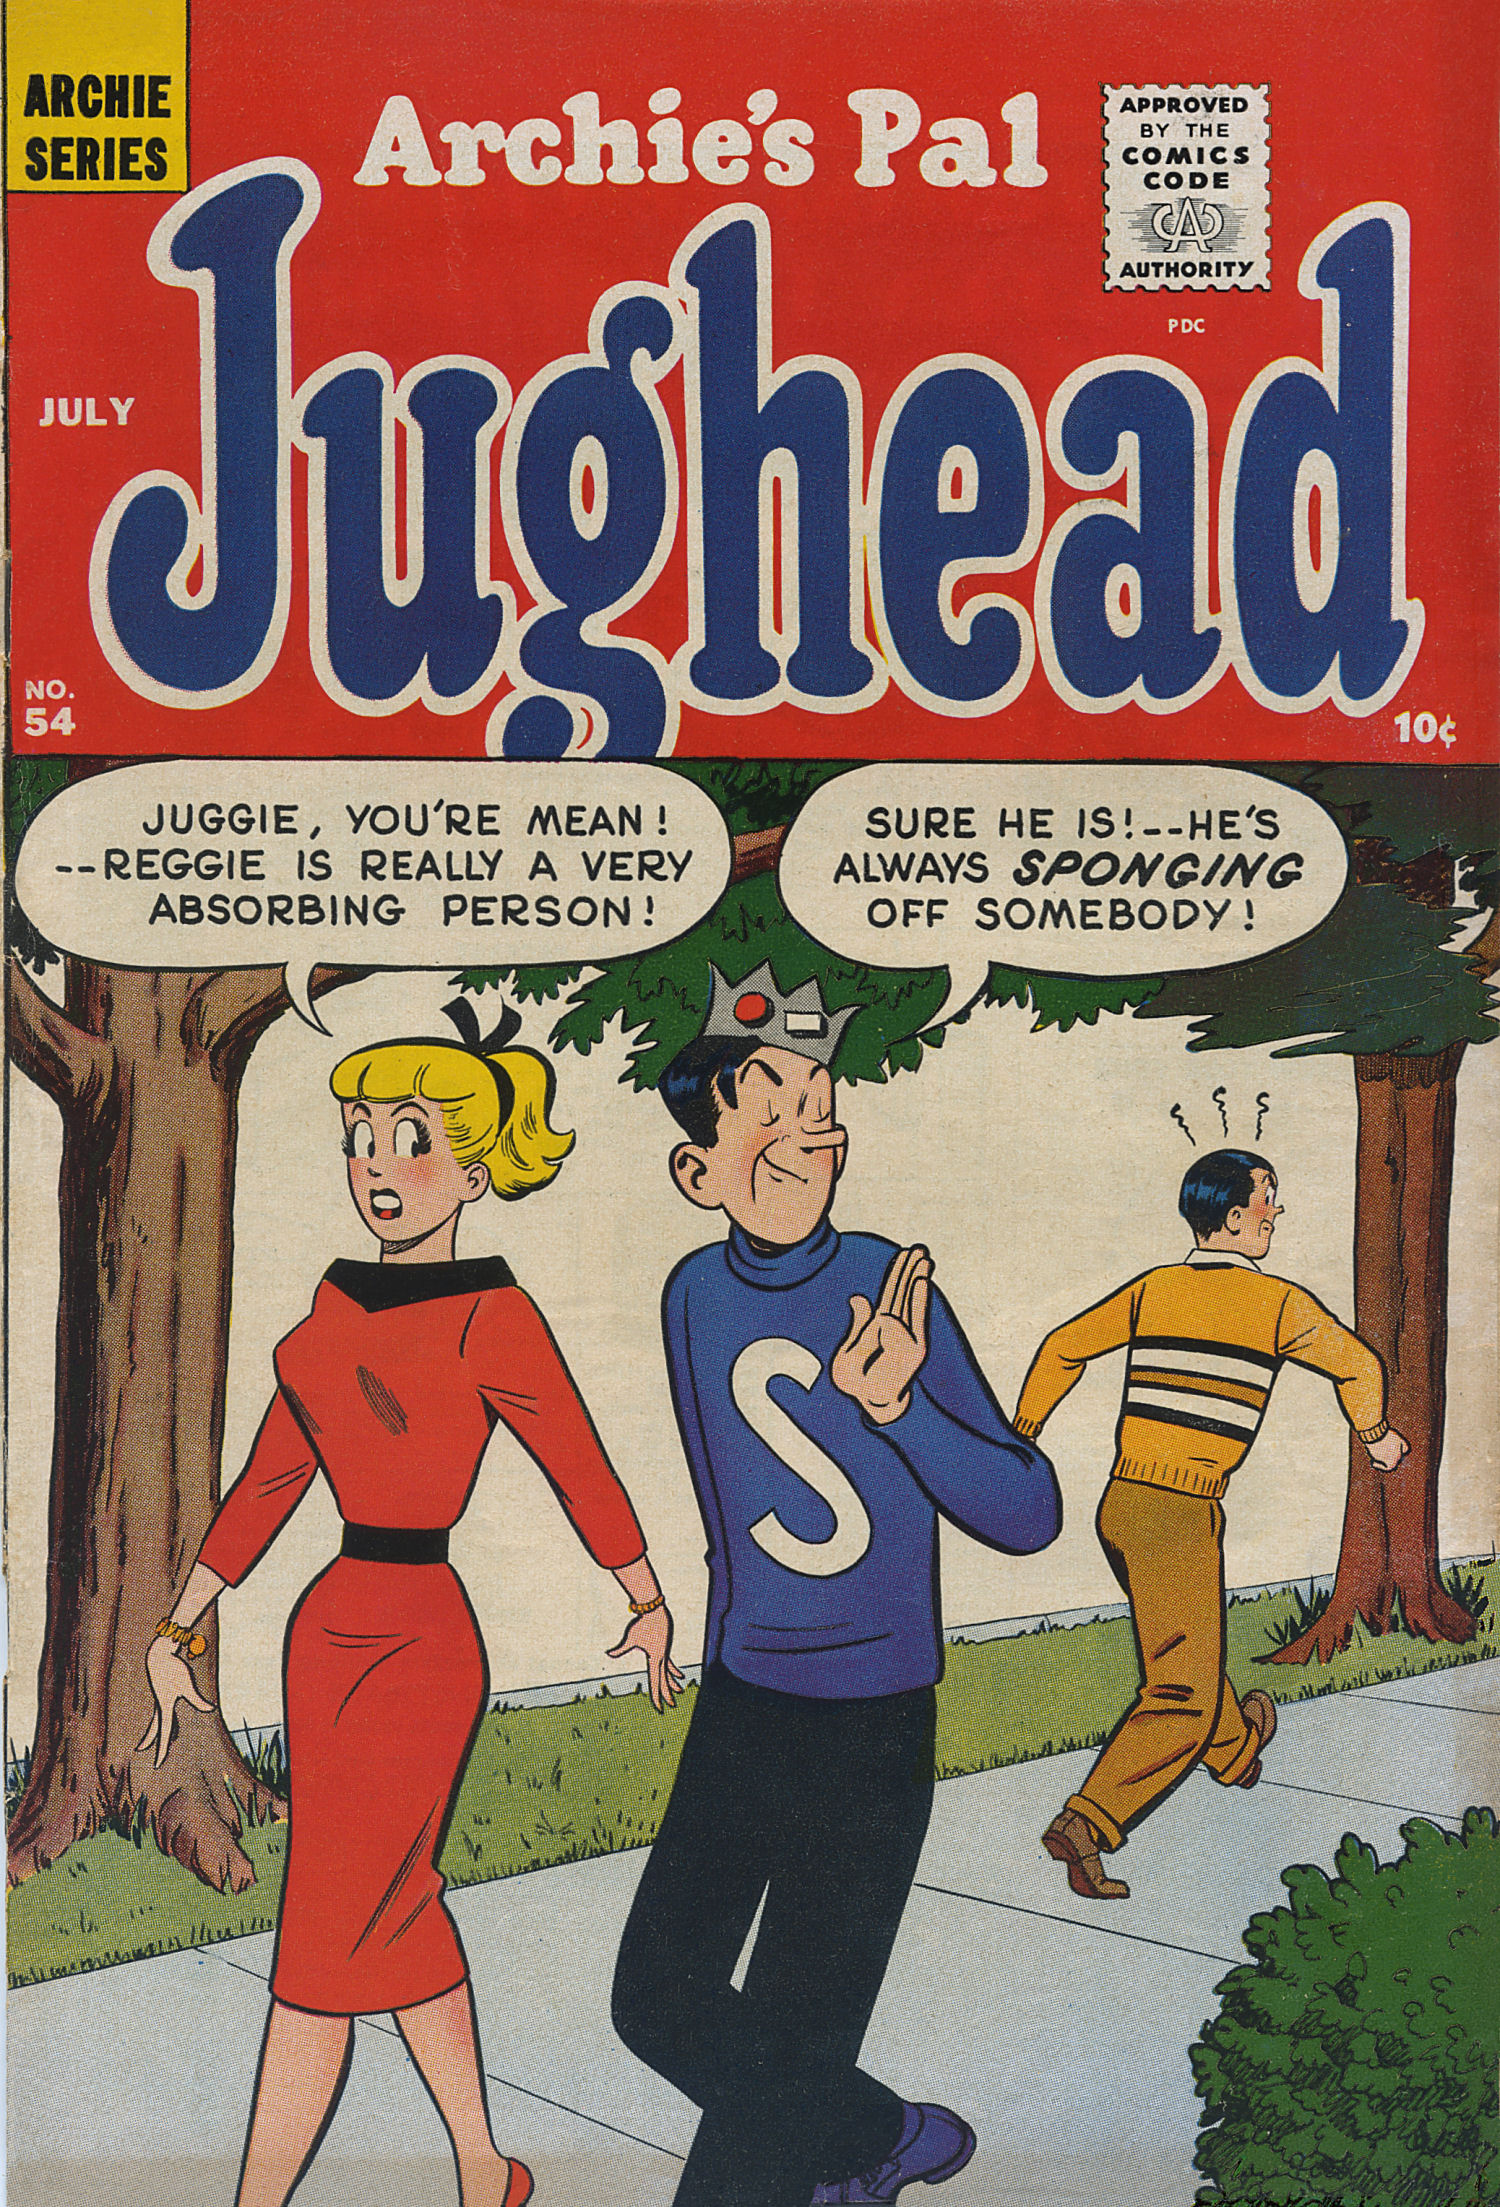 Jughead Archie Porn Cartoons - Archie S Pal Jughead Issue 54 | Read Archie S Pal Jughead Issue 54 comic  online in high quality. Read Full Comic online for free - Read comics  online in high quality .| READ COMIC ONLINE